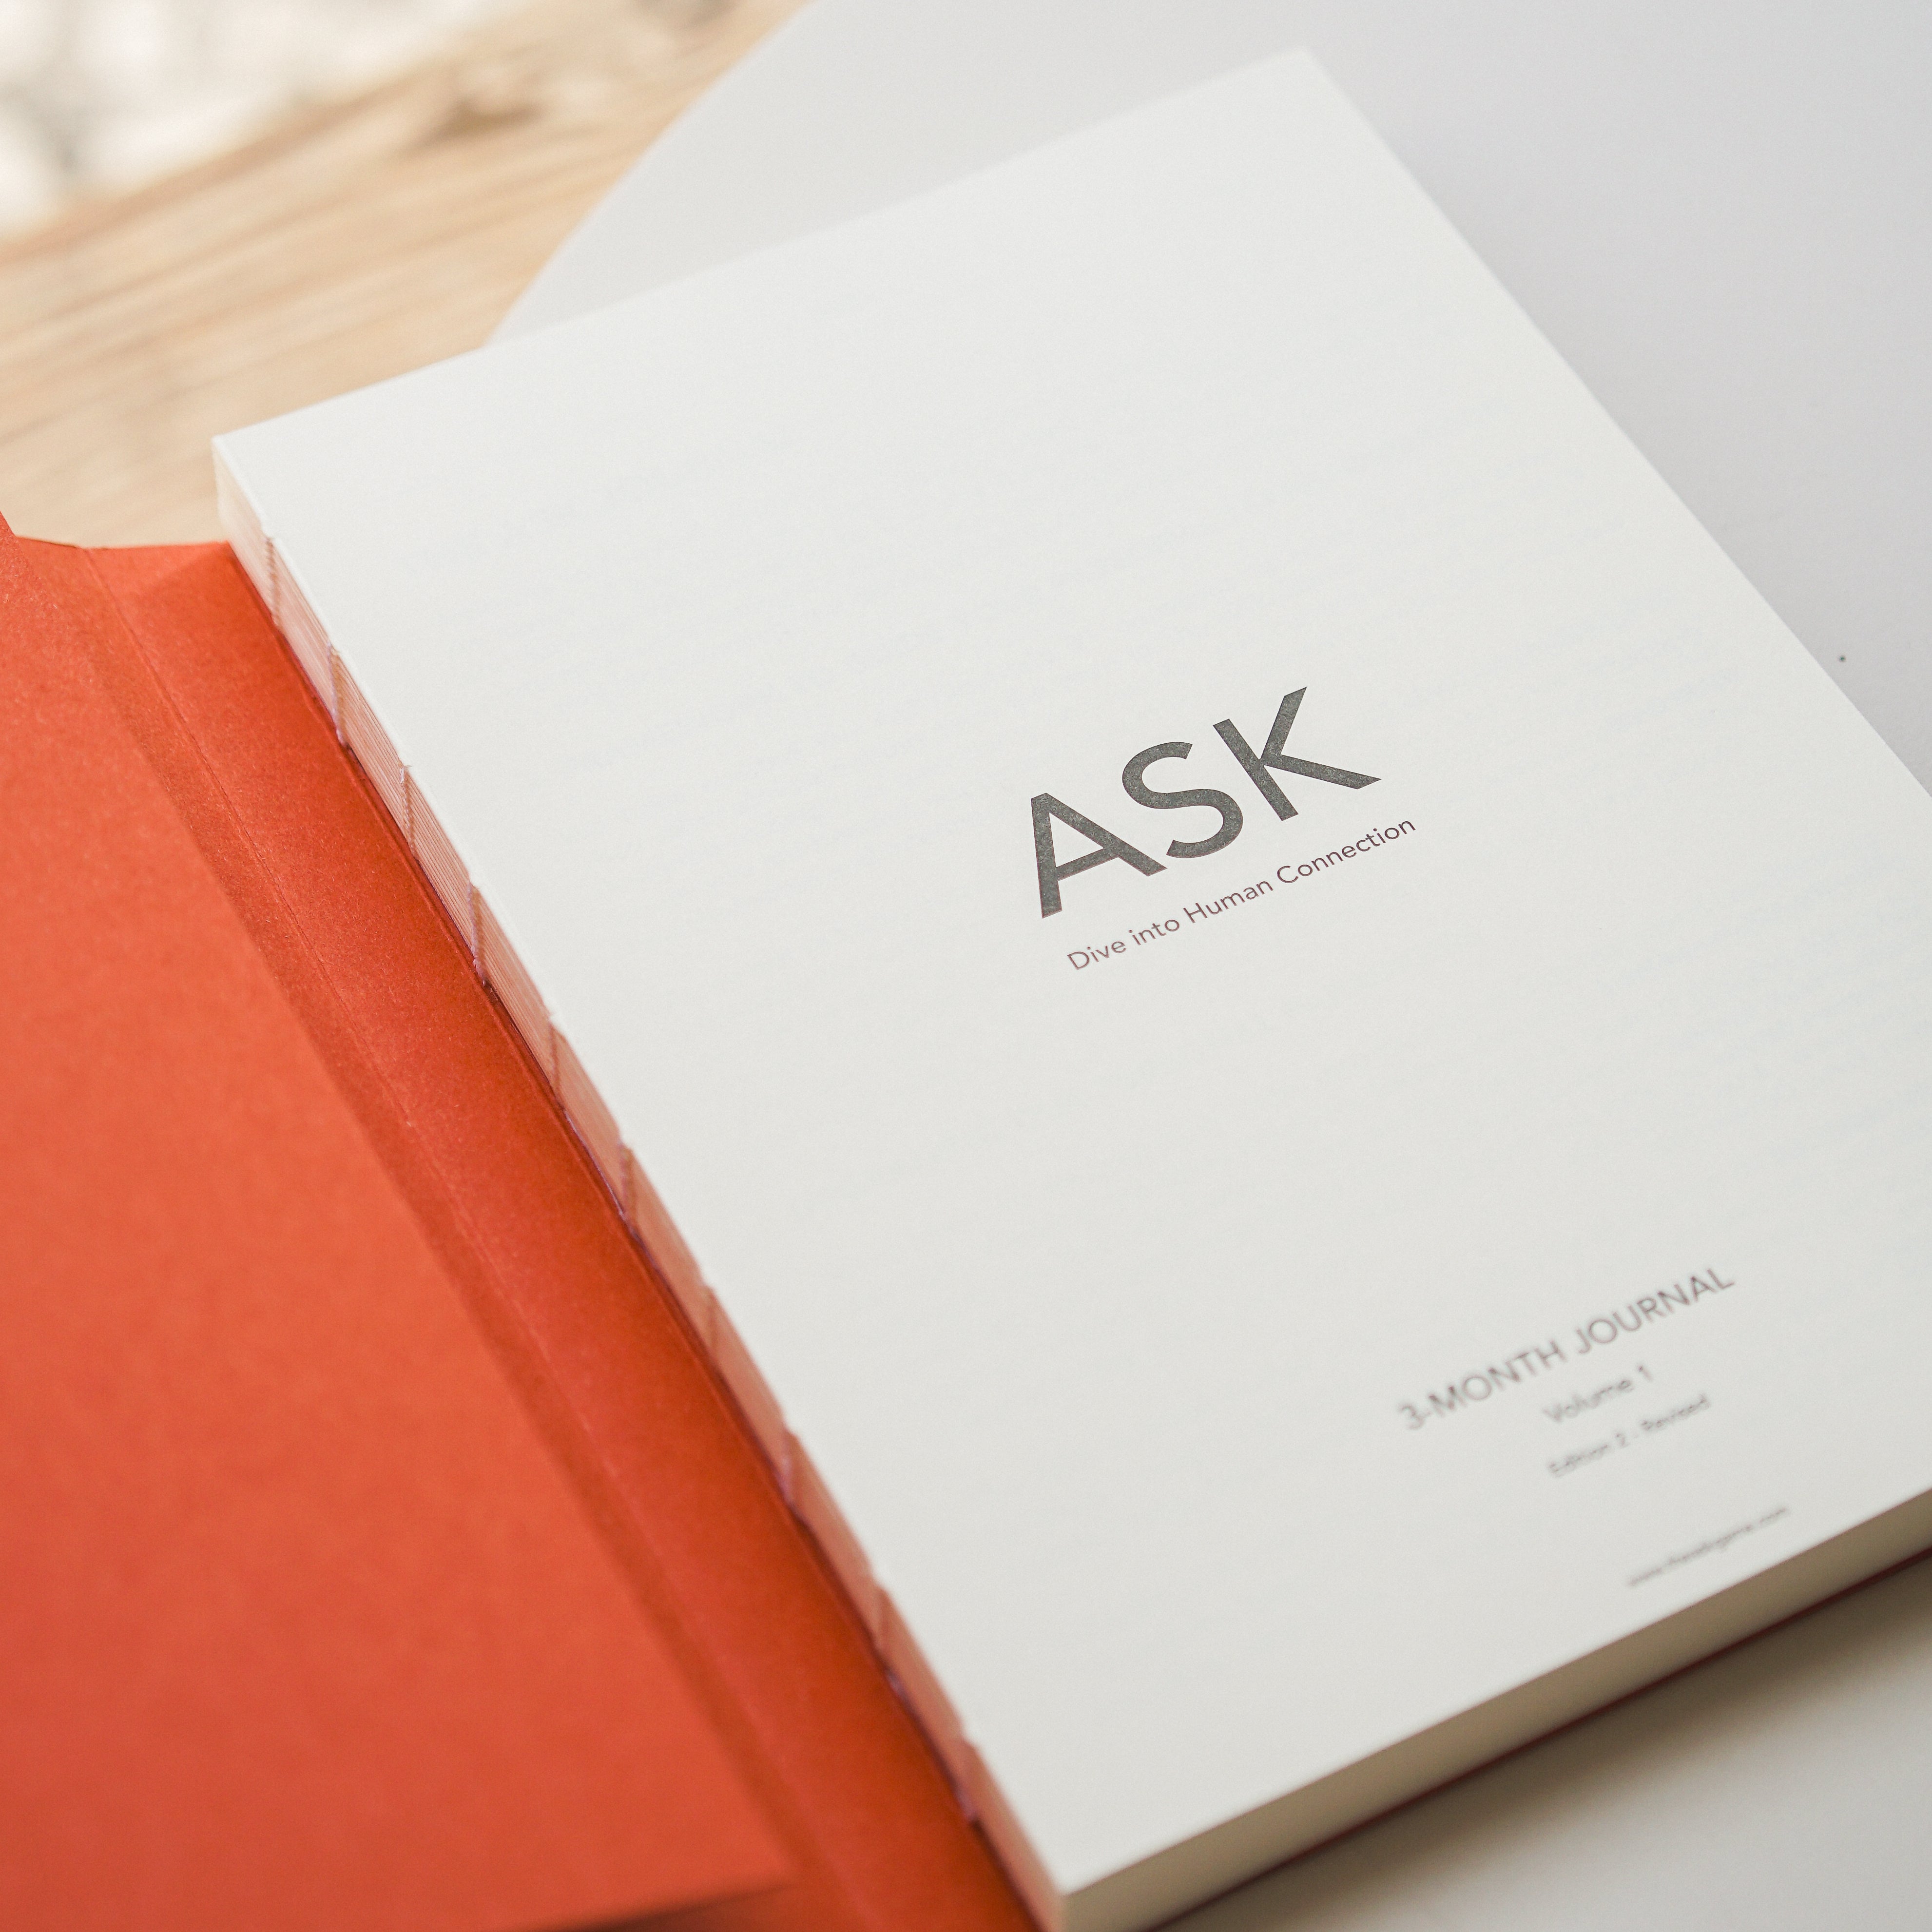 ASK Journal - Edition 2